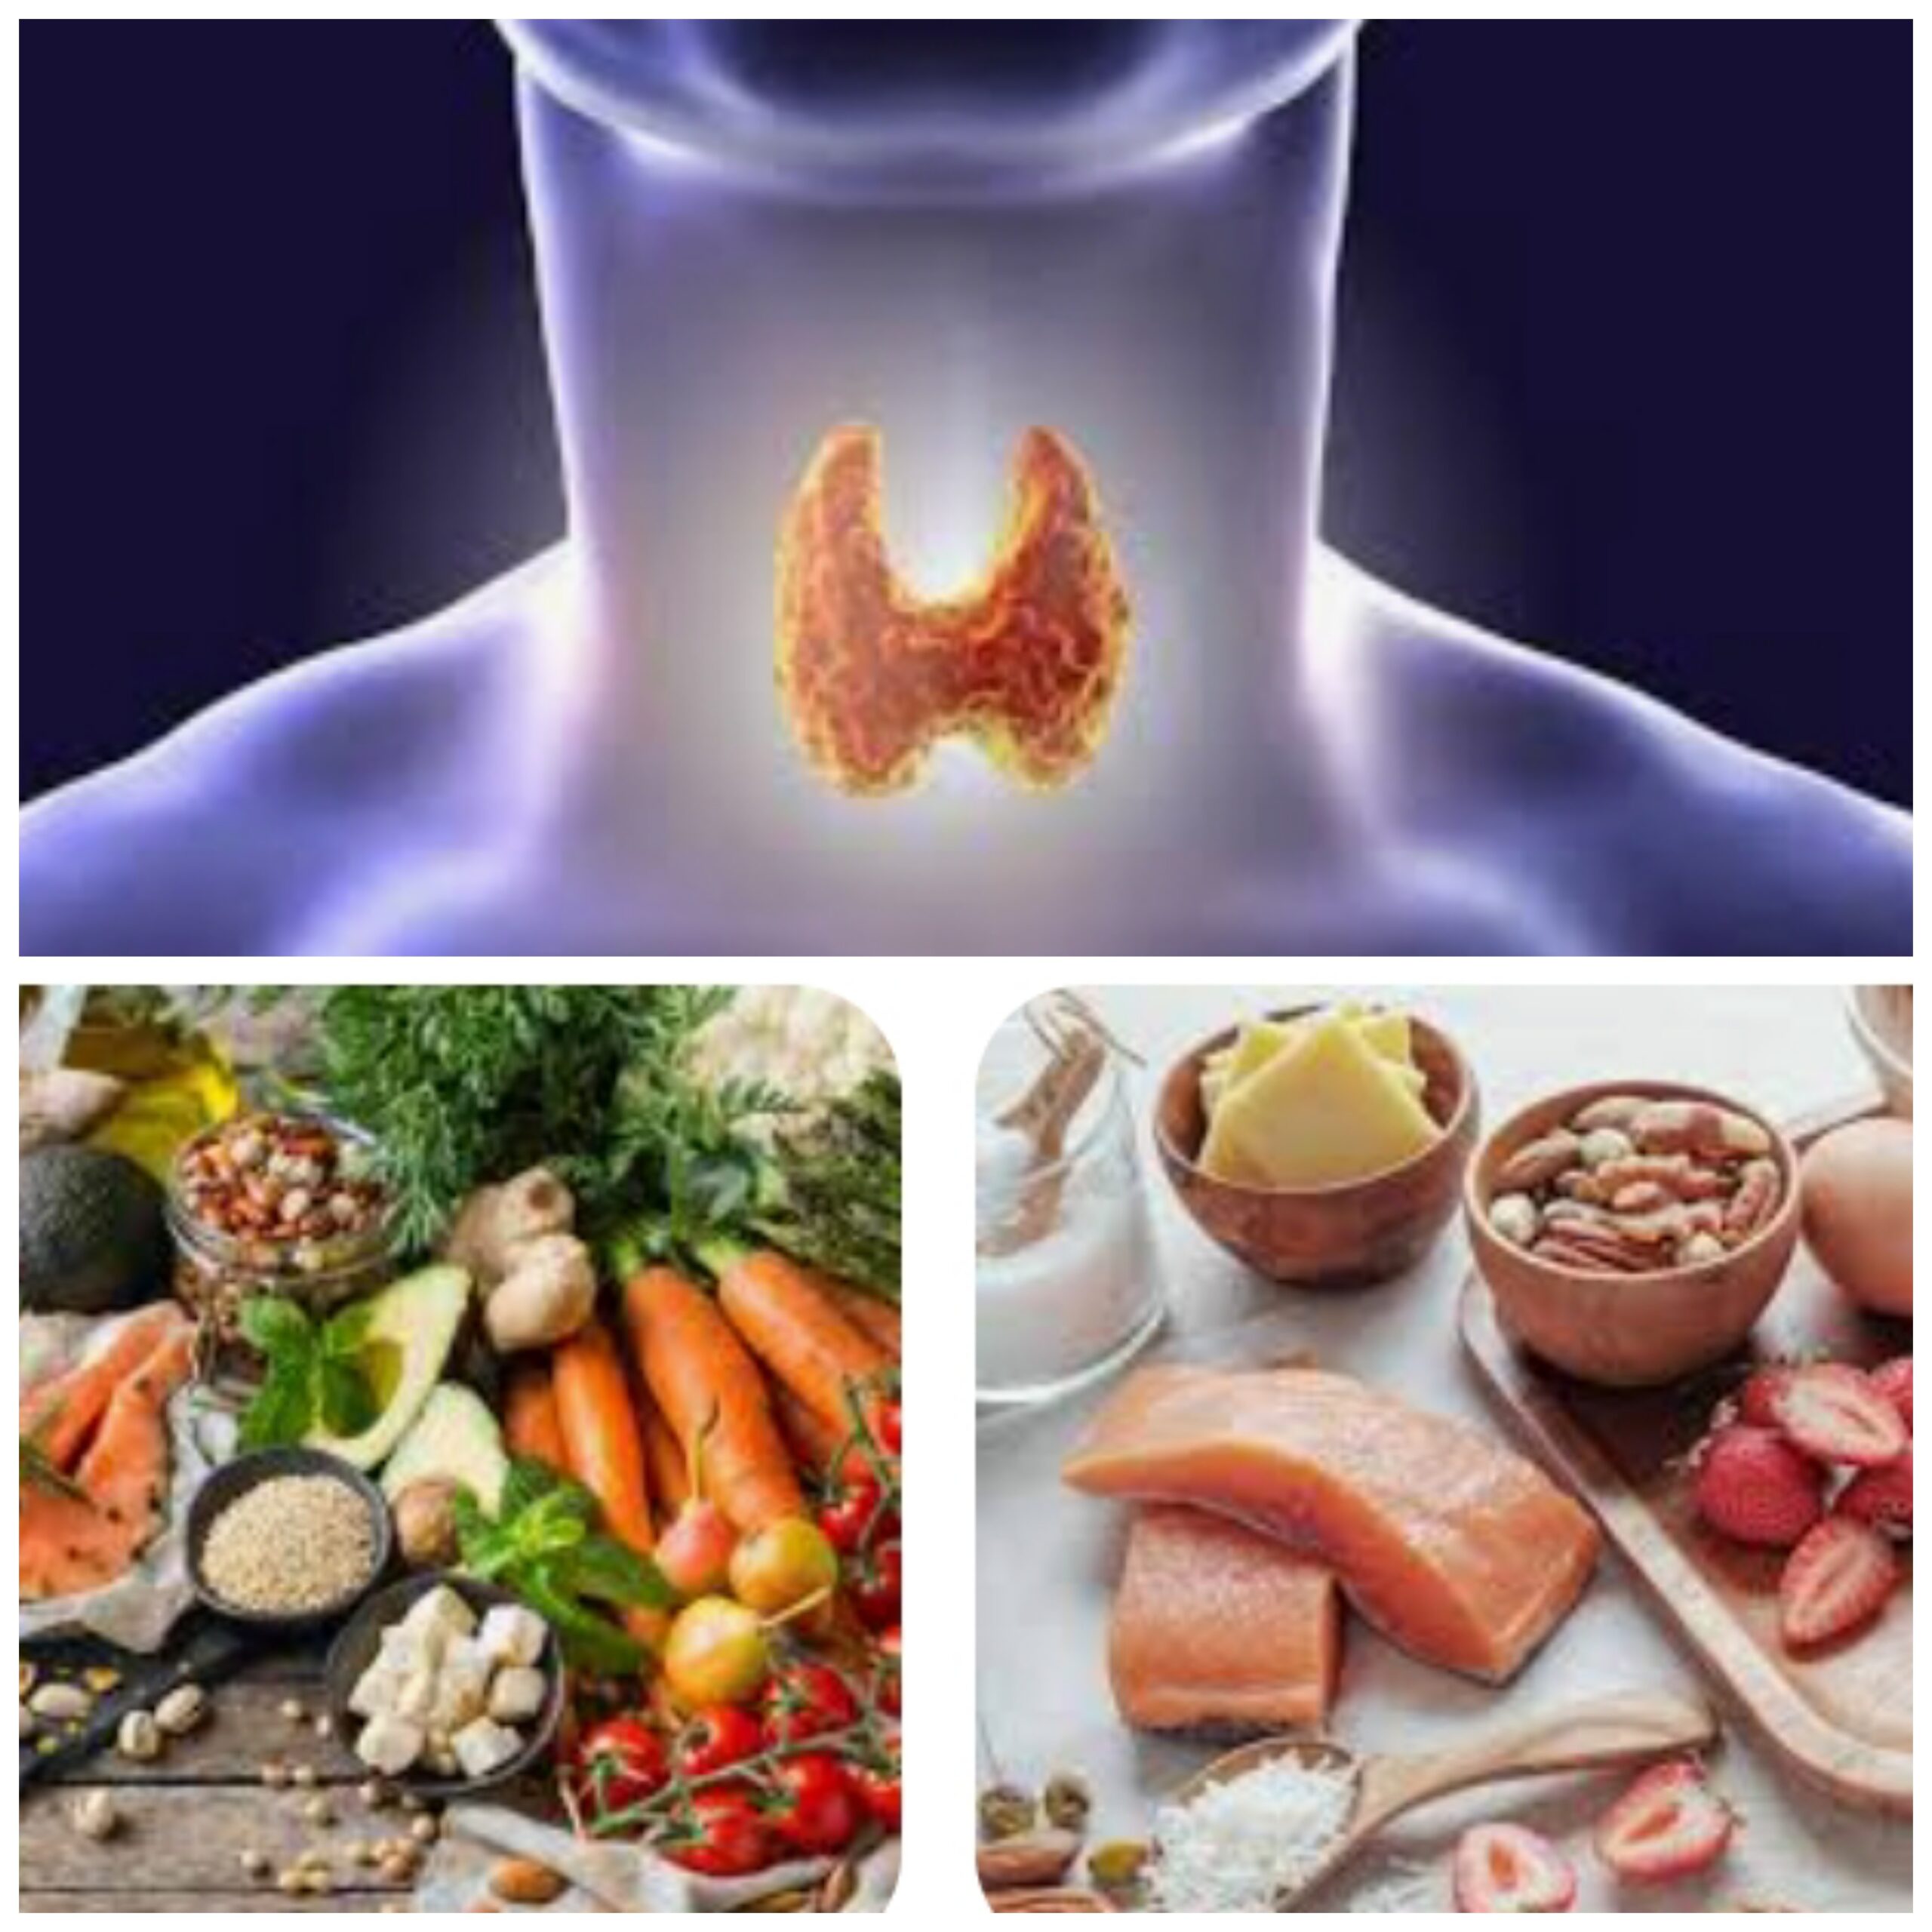 To have healthy Thyroid